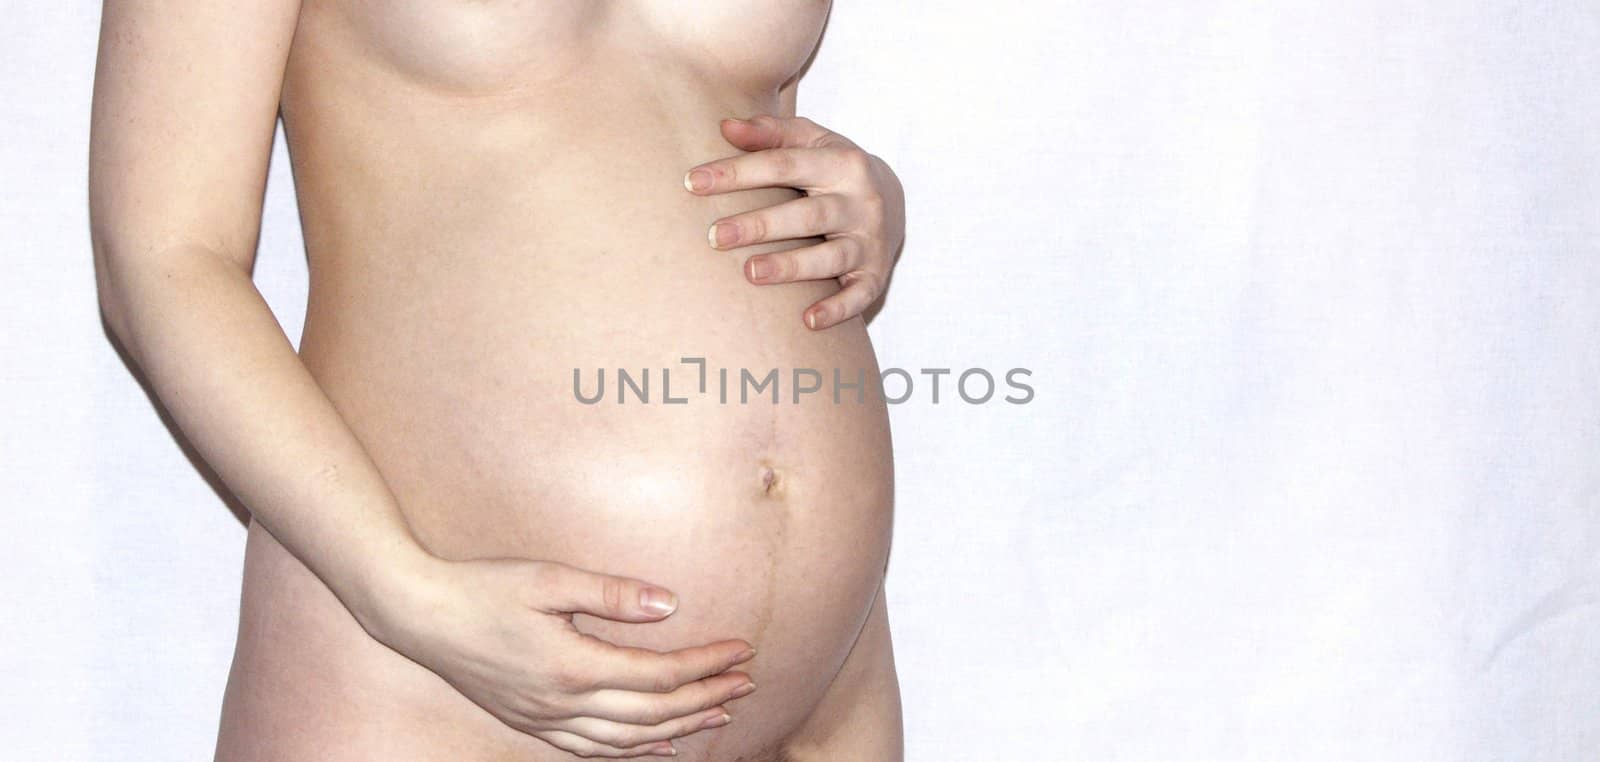 The image of a stomach of the pregnant woman